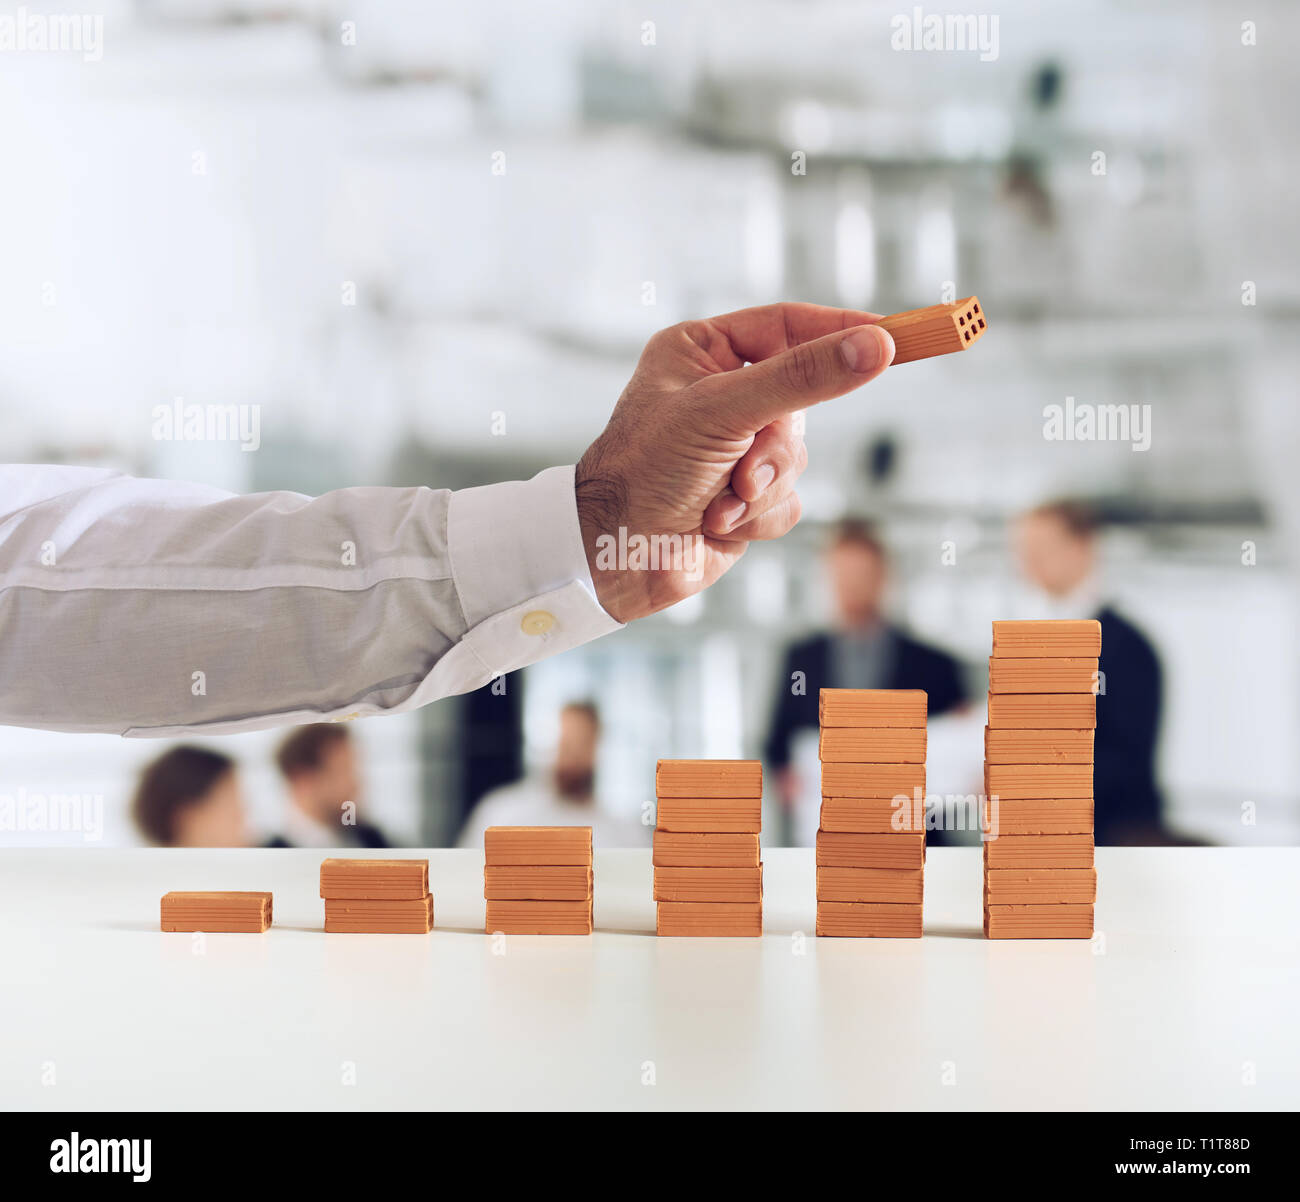 Businessman puts a brick on a bricks pile. Concept of growing statistics and success Stock Photo